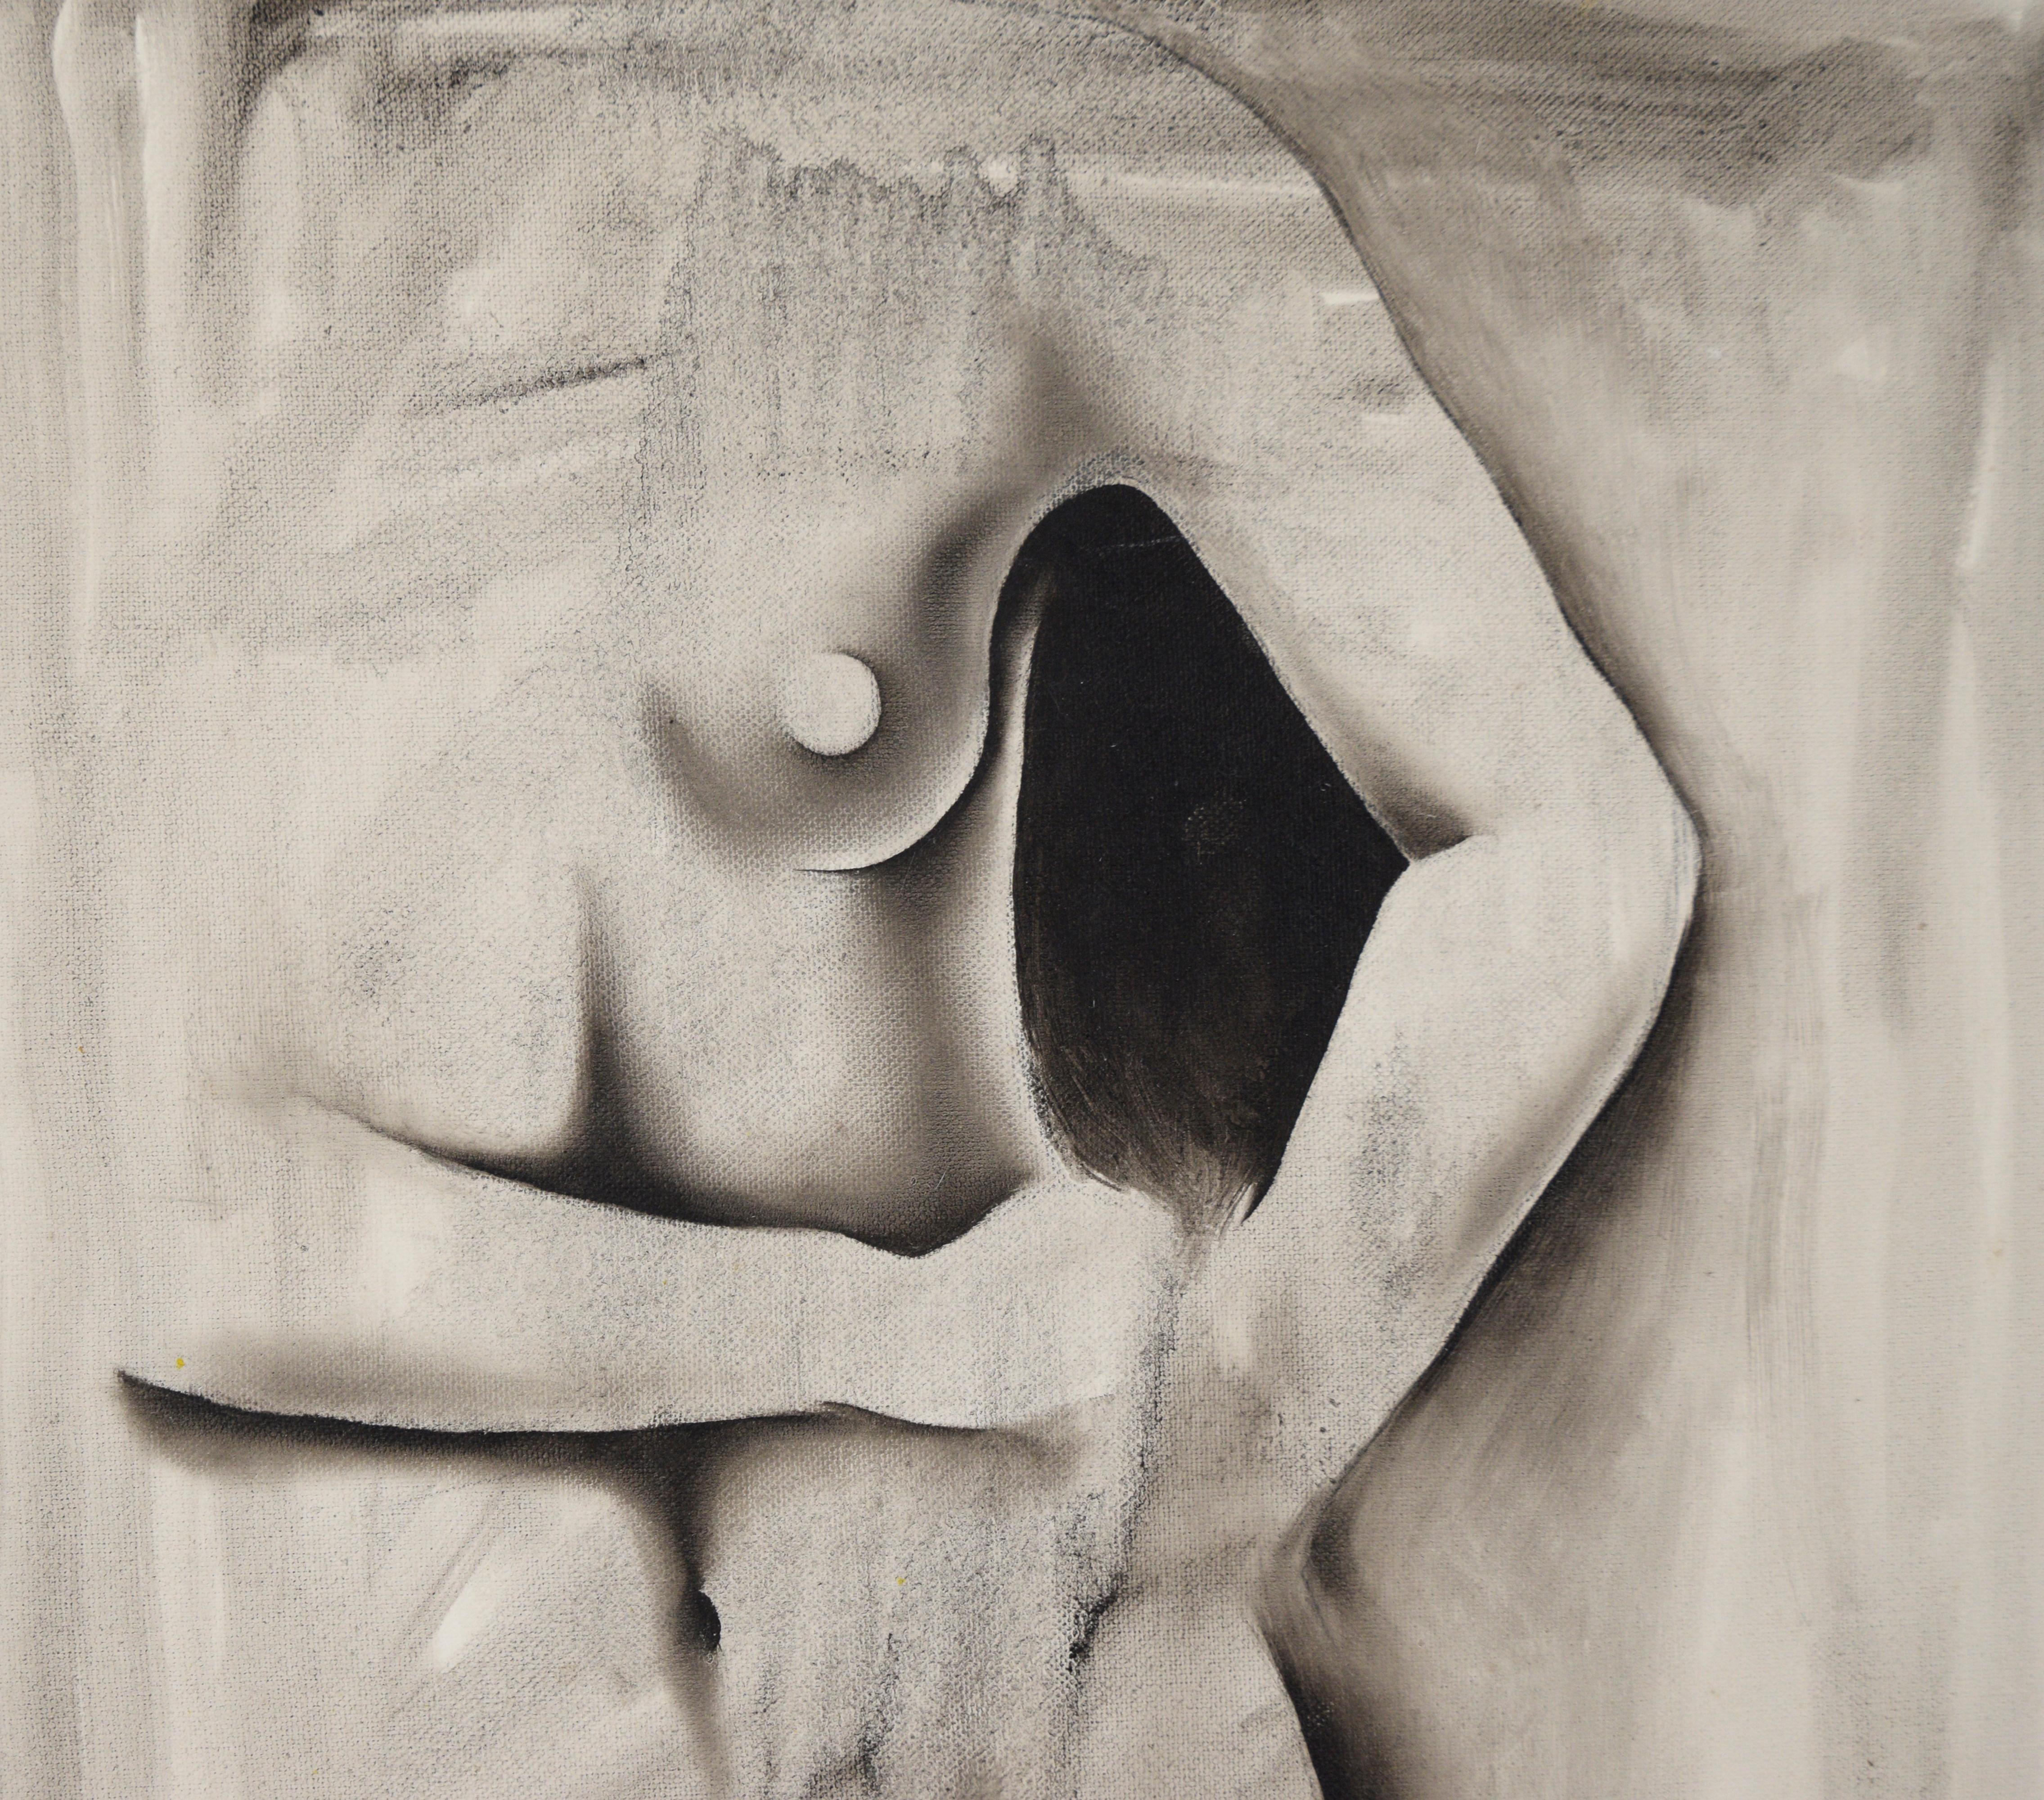 Black and White Figurative Nude - Oil on Canvas - American Impressionist Painting by F. Vasquez